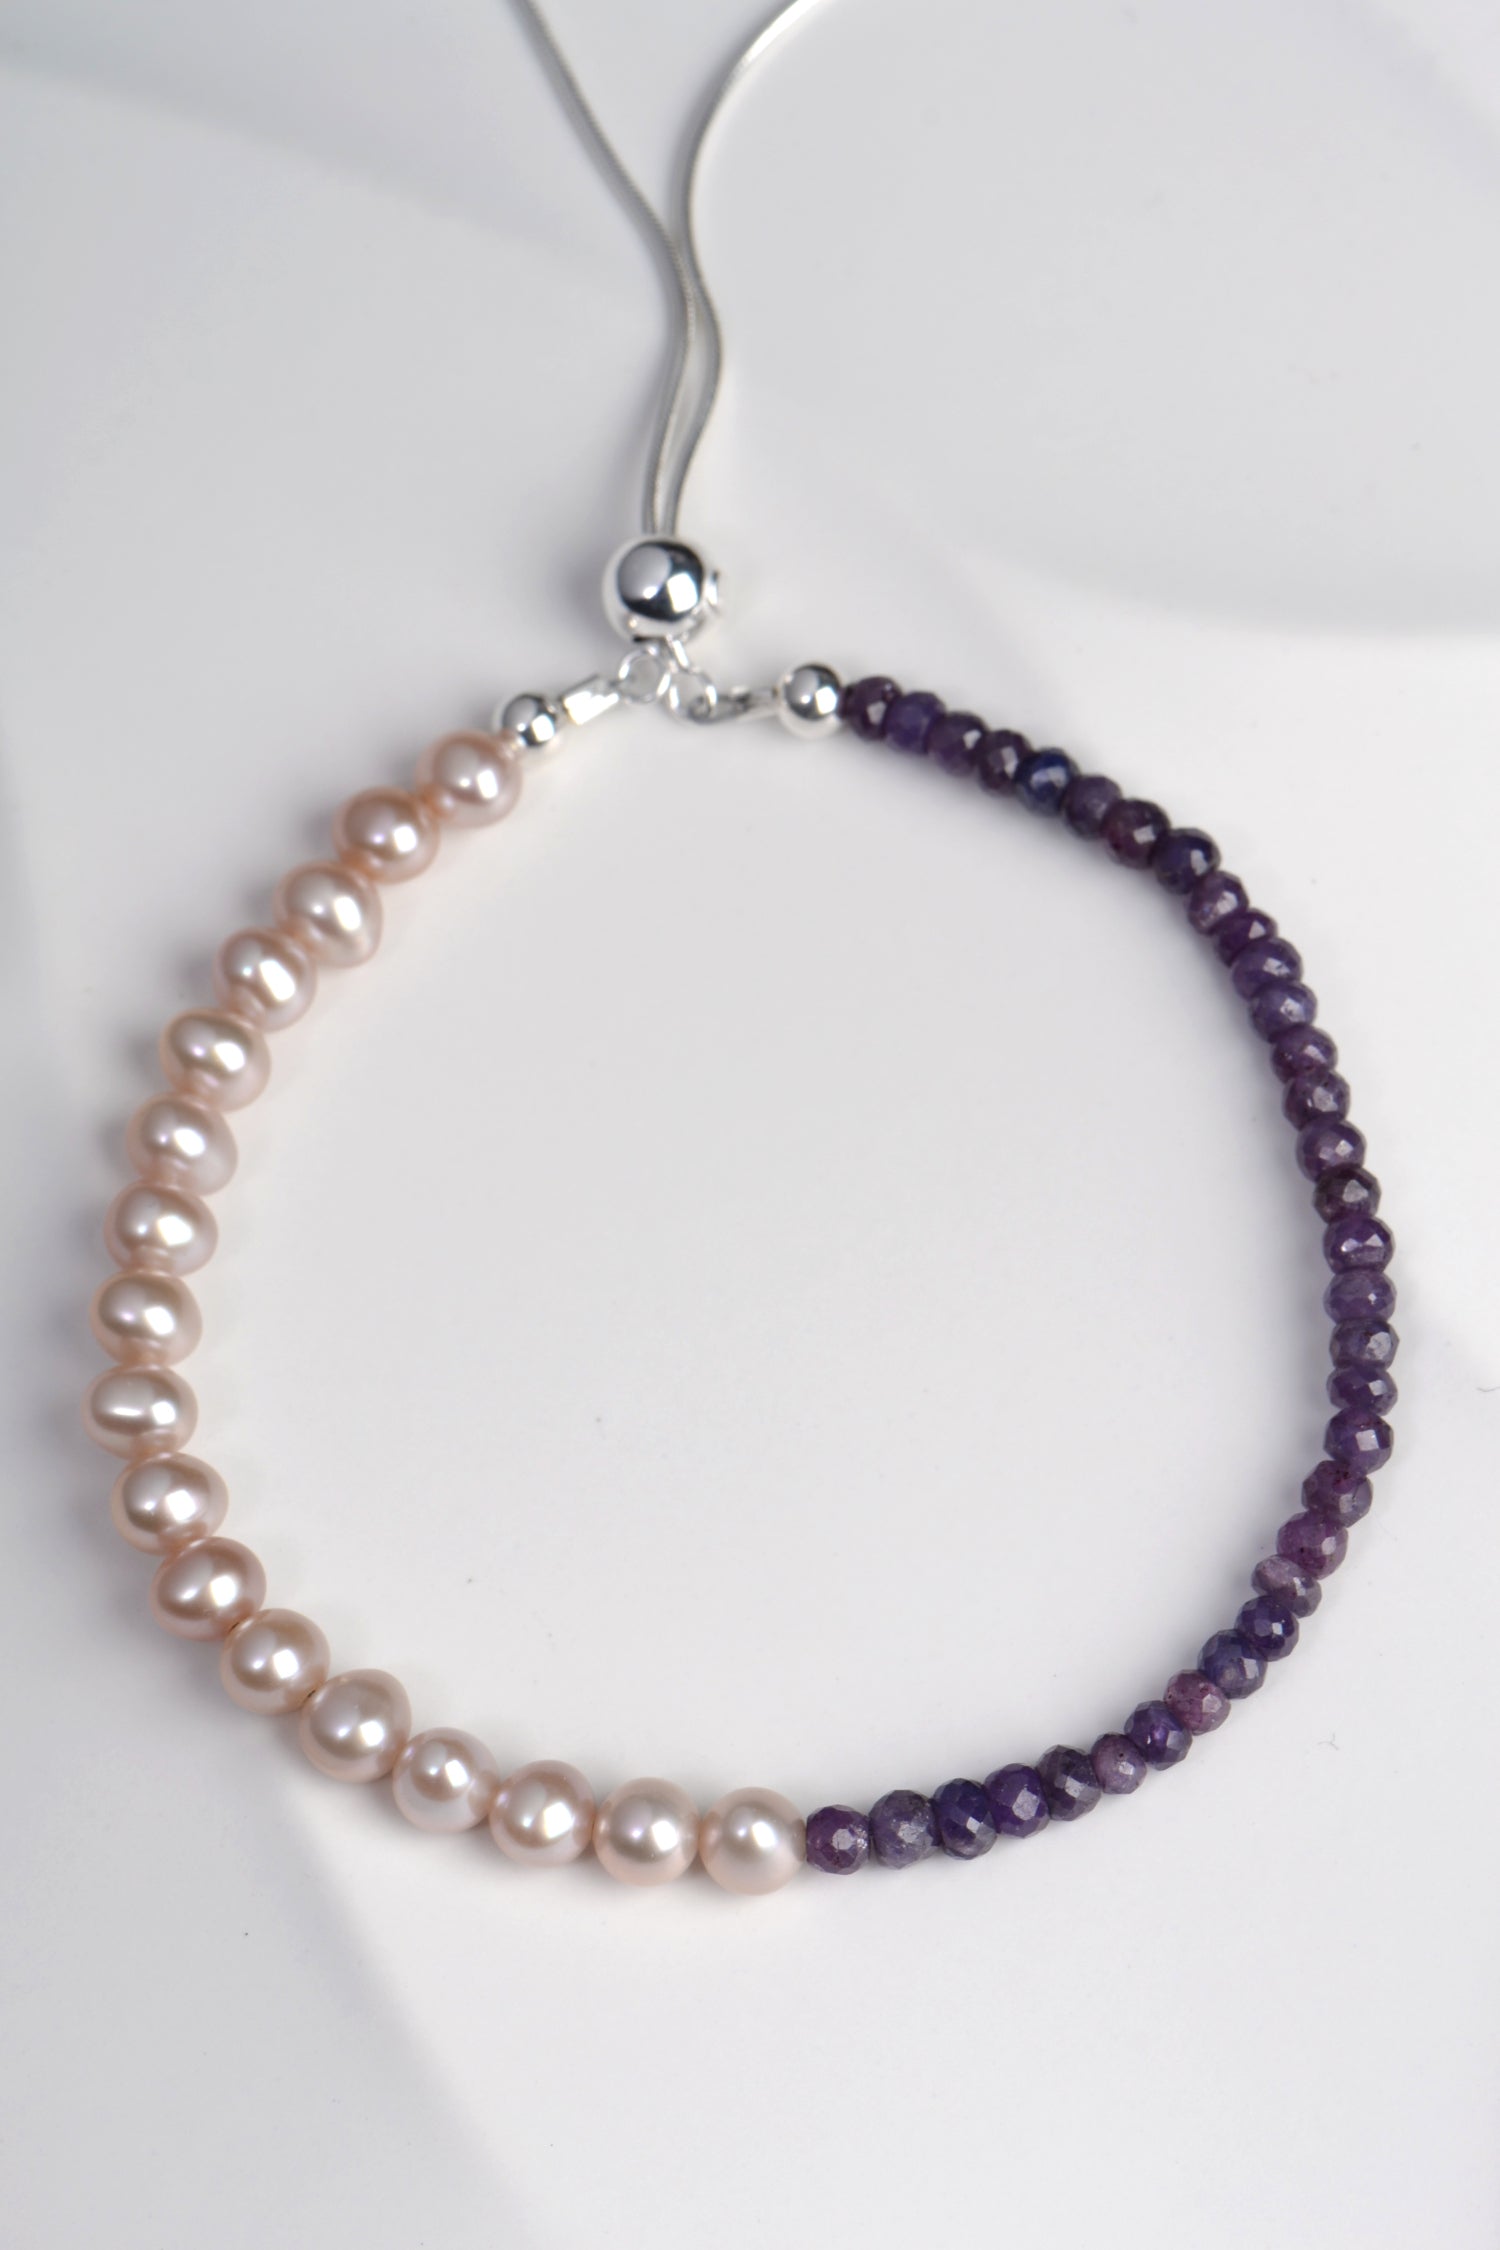 designer bracelet with half pale pink pearls and half purple sapphires with silver adjustable clasp